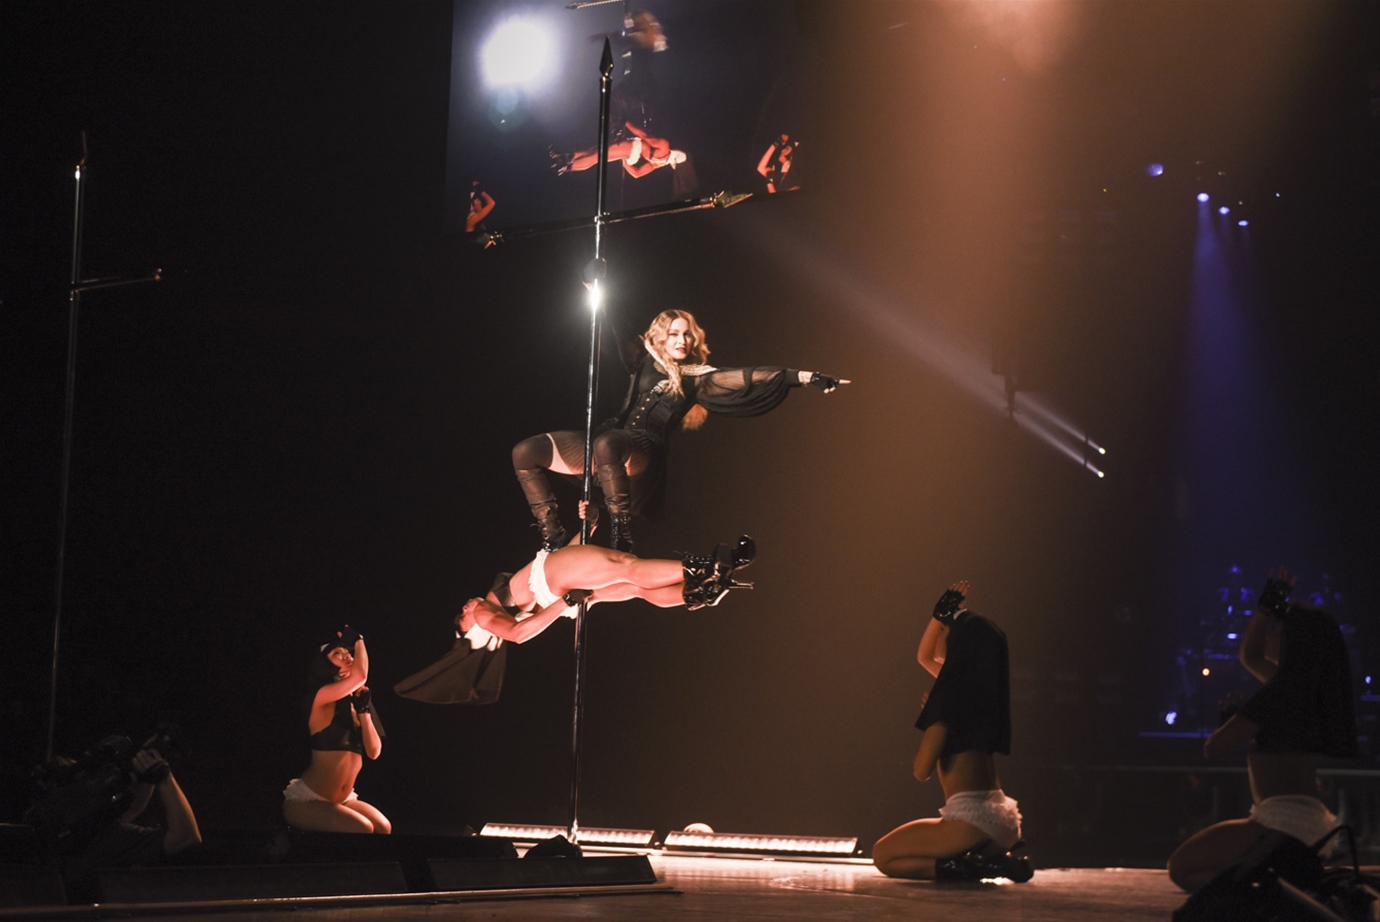 20150927-pictures-madonna-rebel-heart-tour-stage-13.jpg